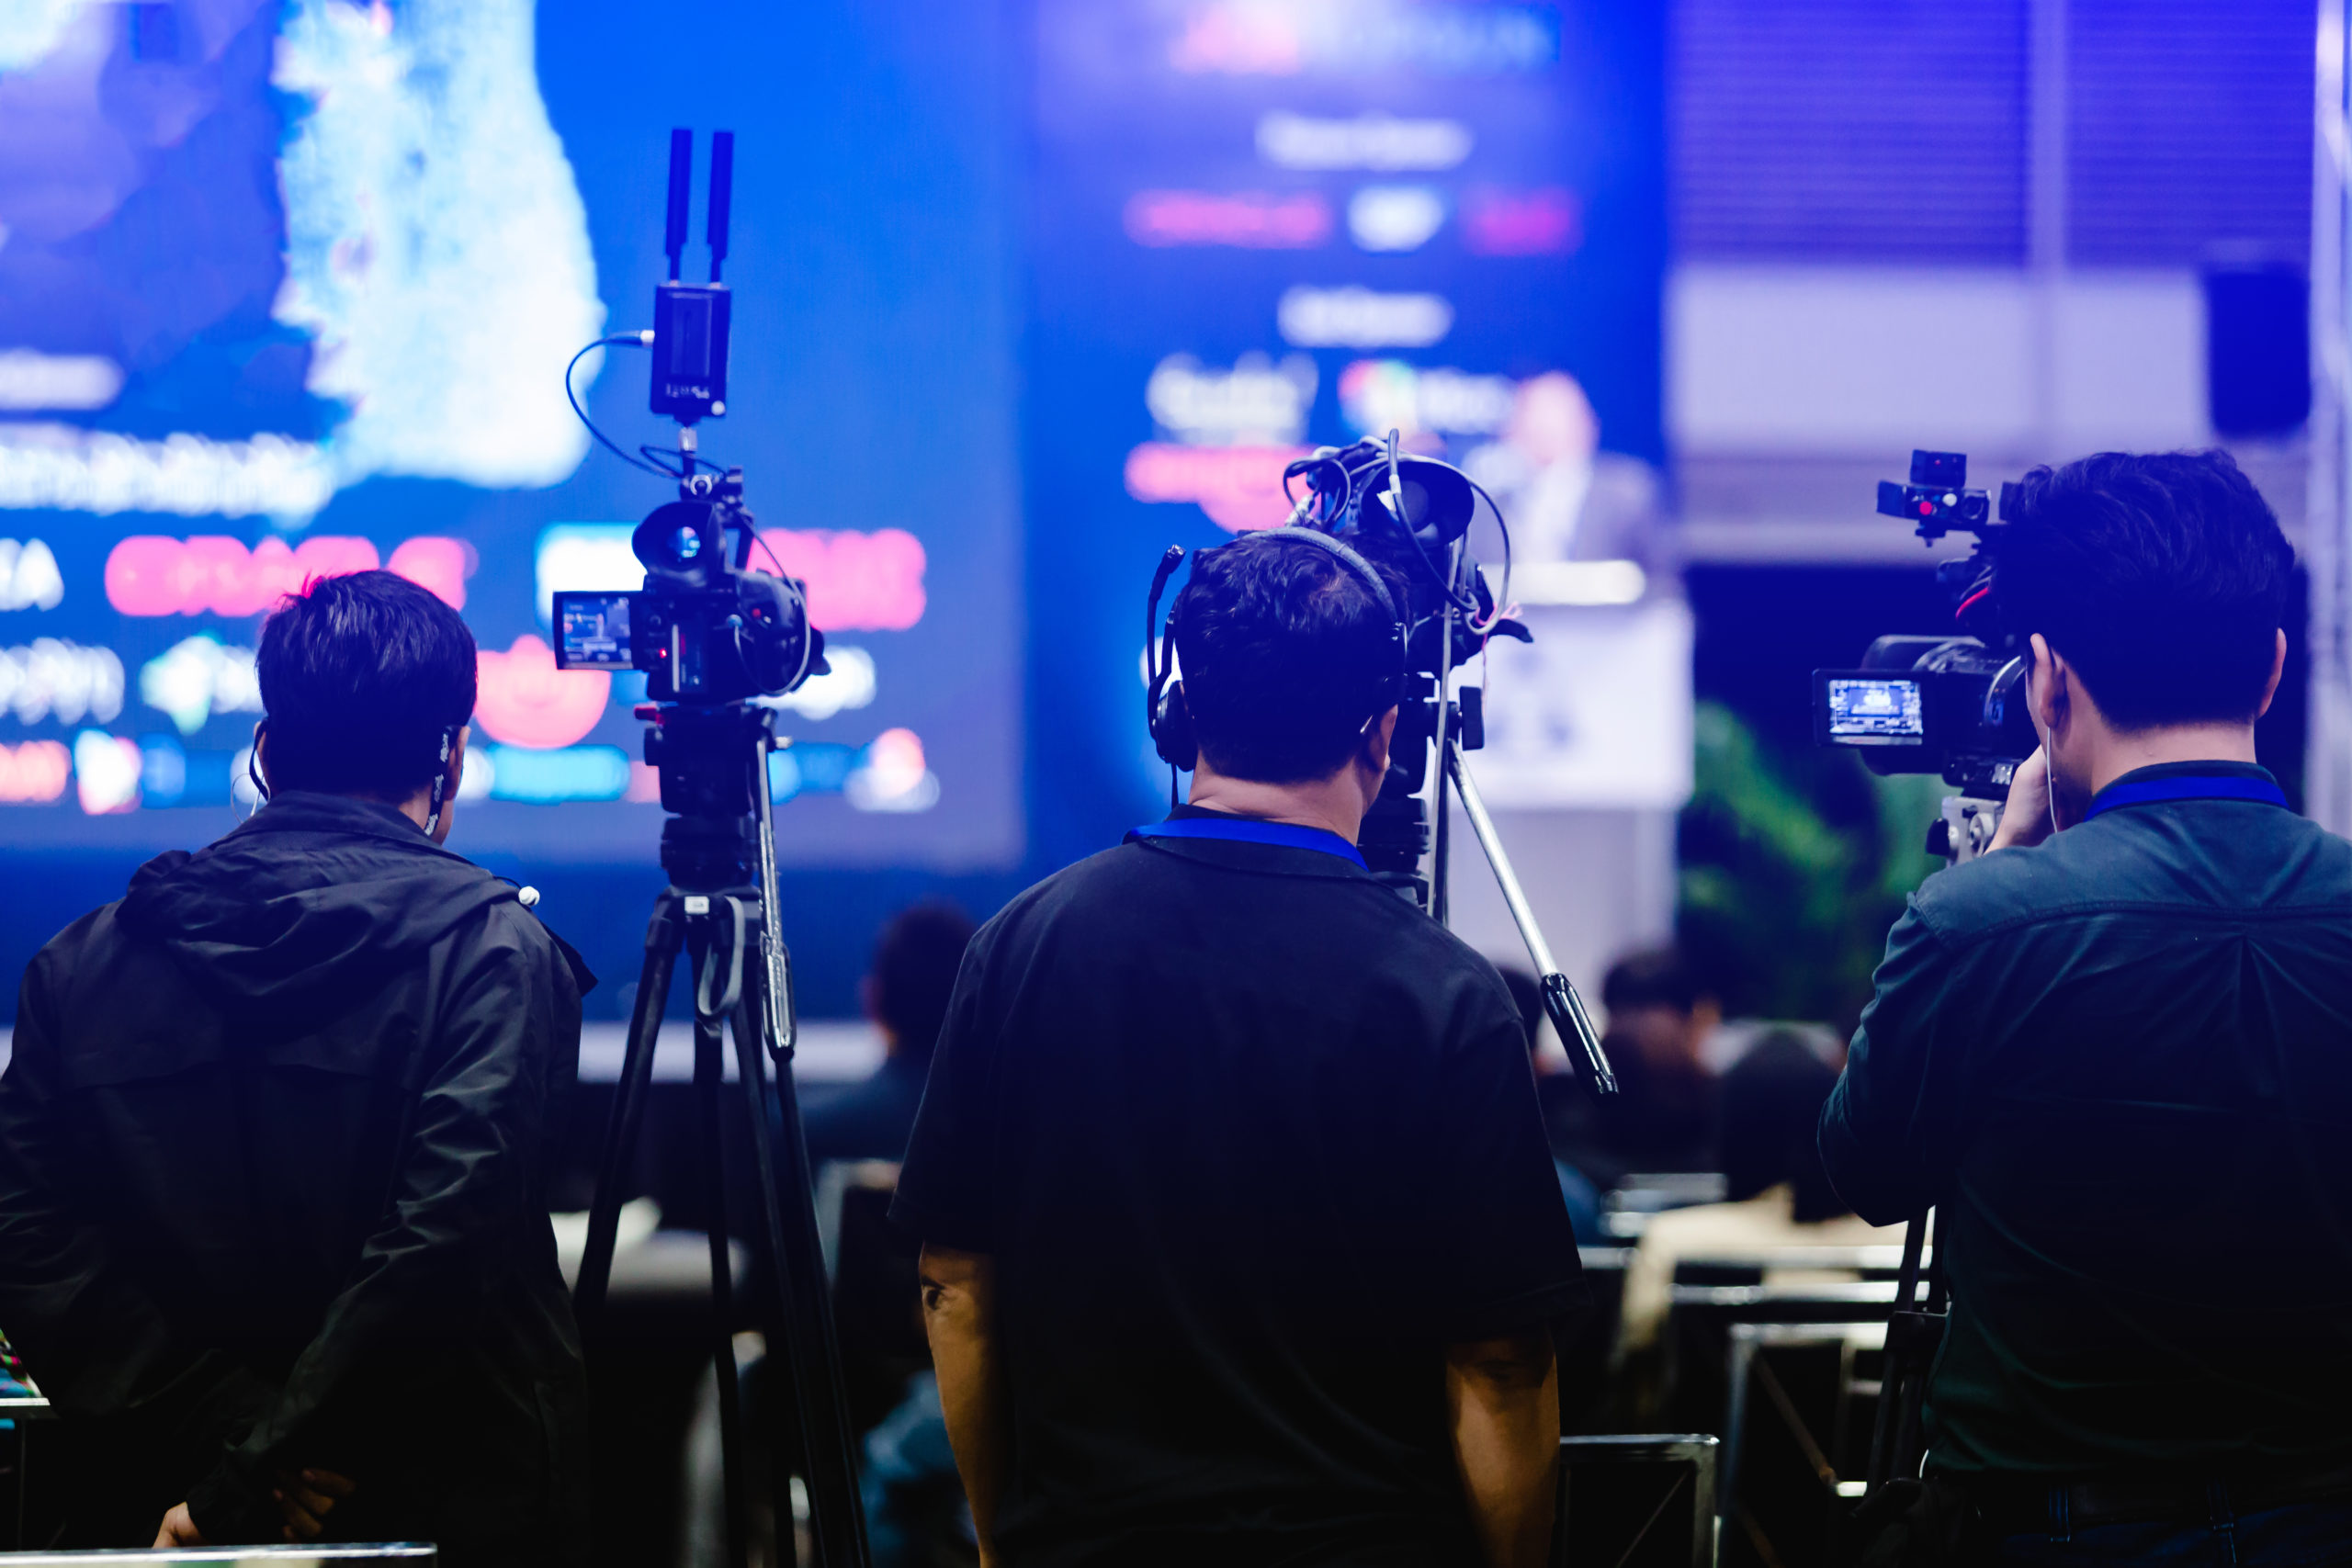 Best cameras for live streaming events